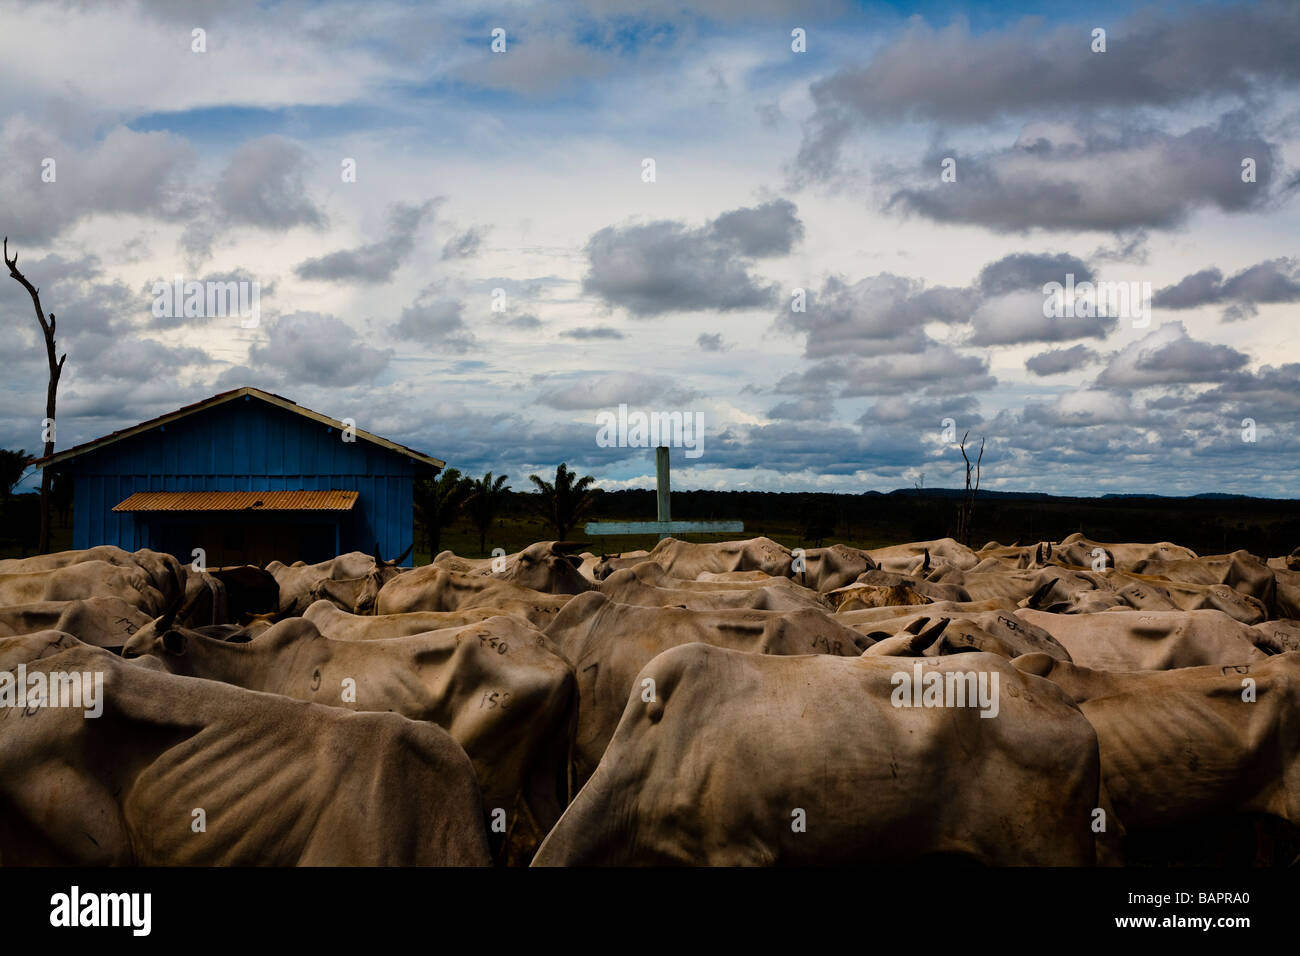 Herd of cattle BR 163 road at South Para State Amazon Brazil Stock Photo